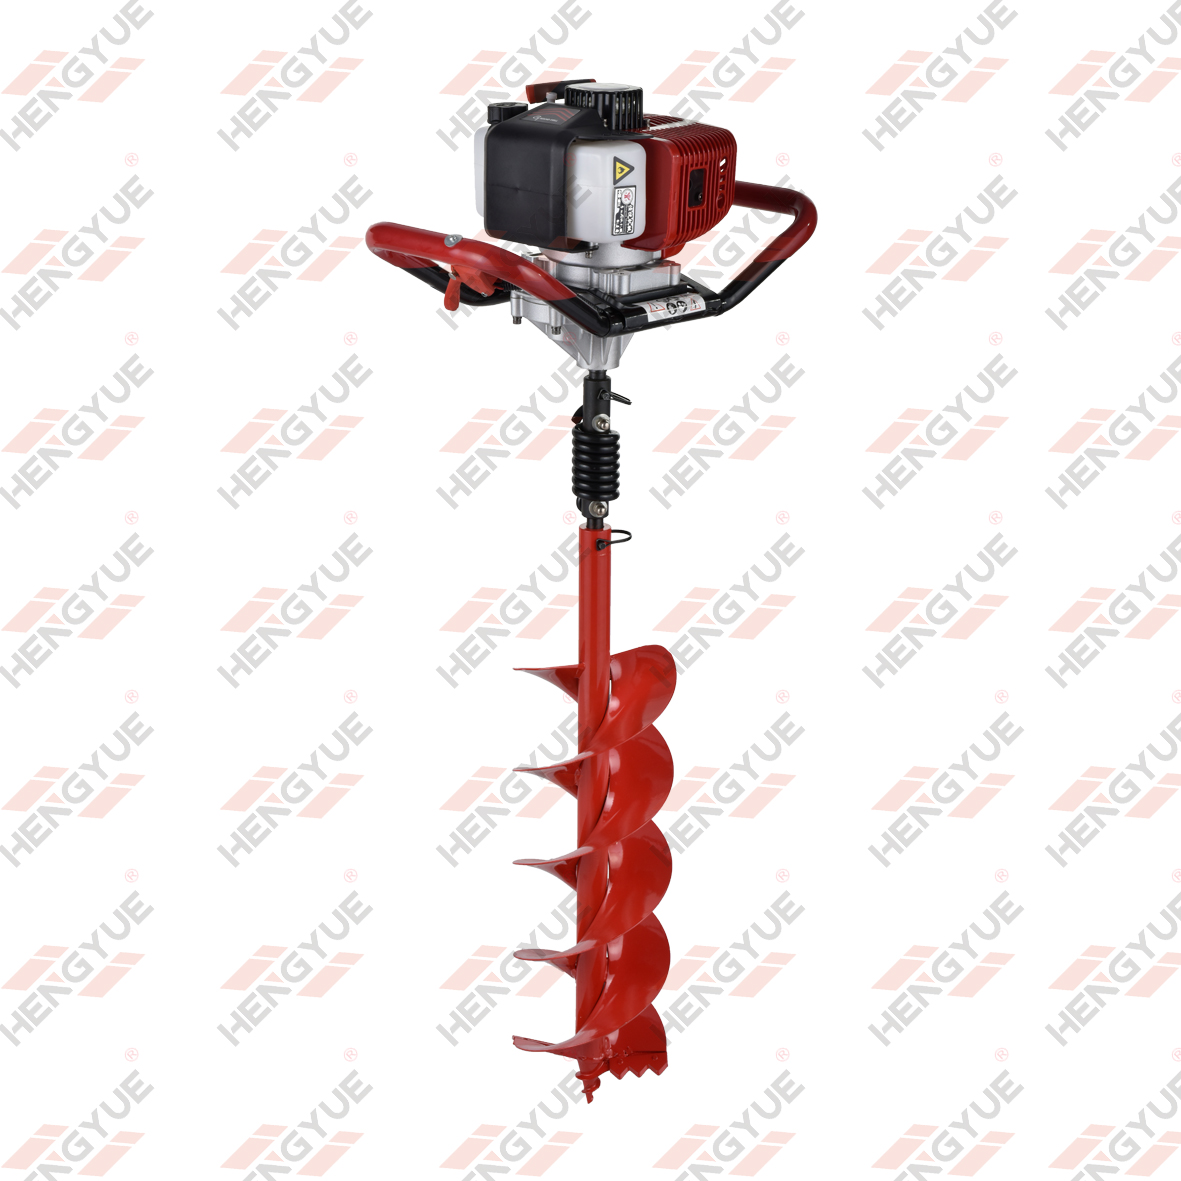 52CC Hand Held Earth Auger Earth Auger Drilling Machine